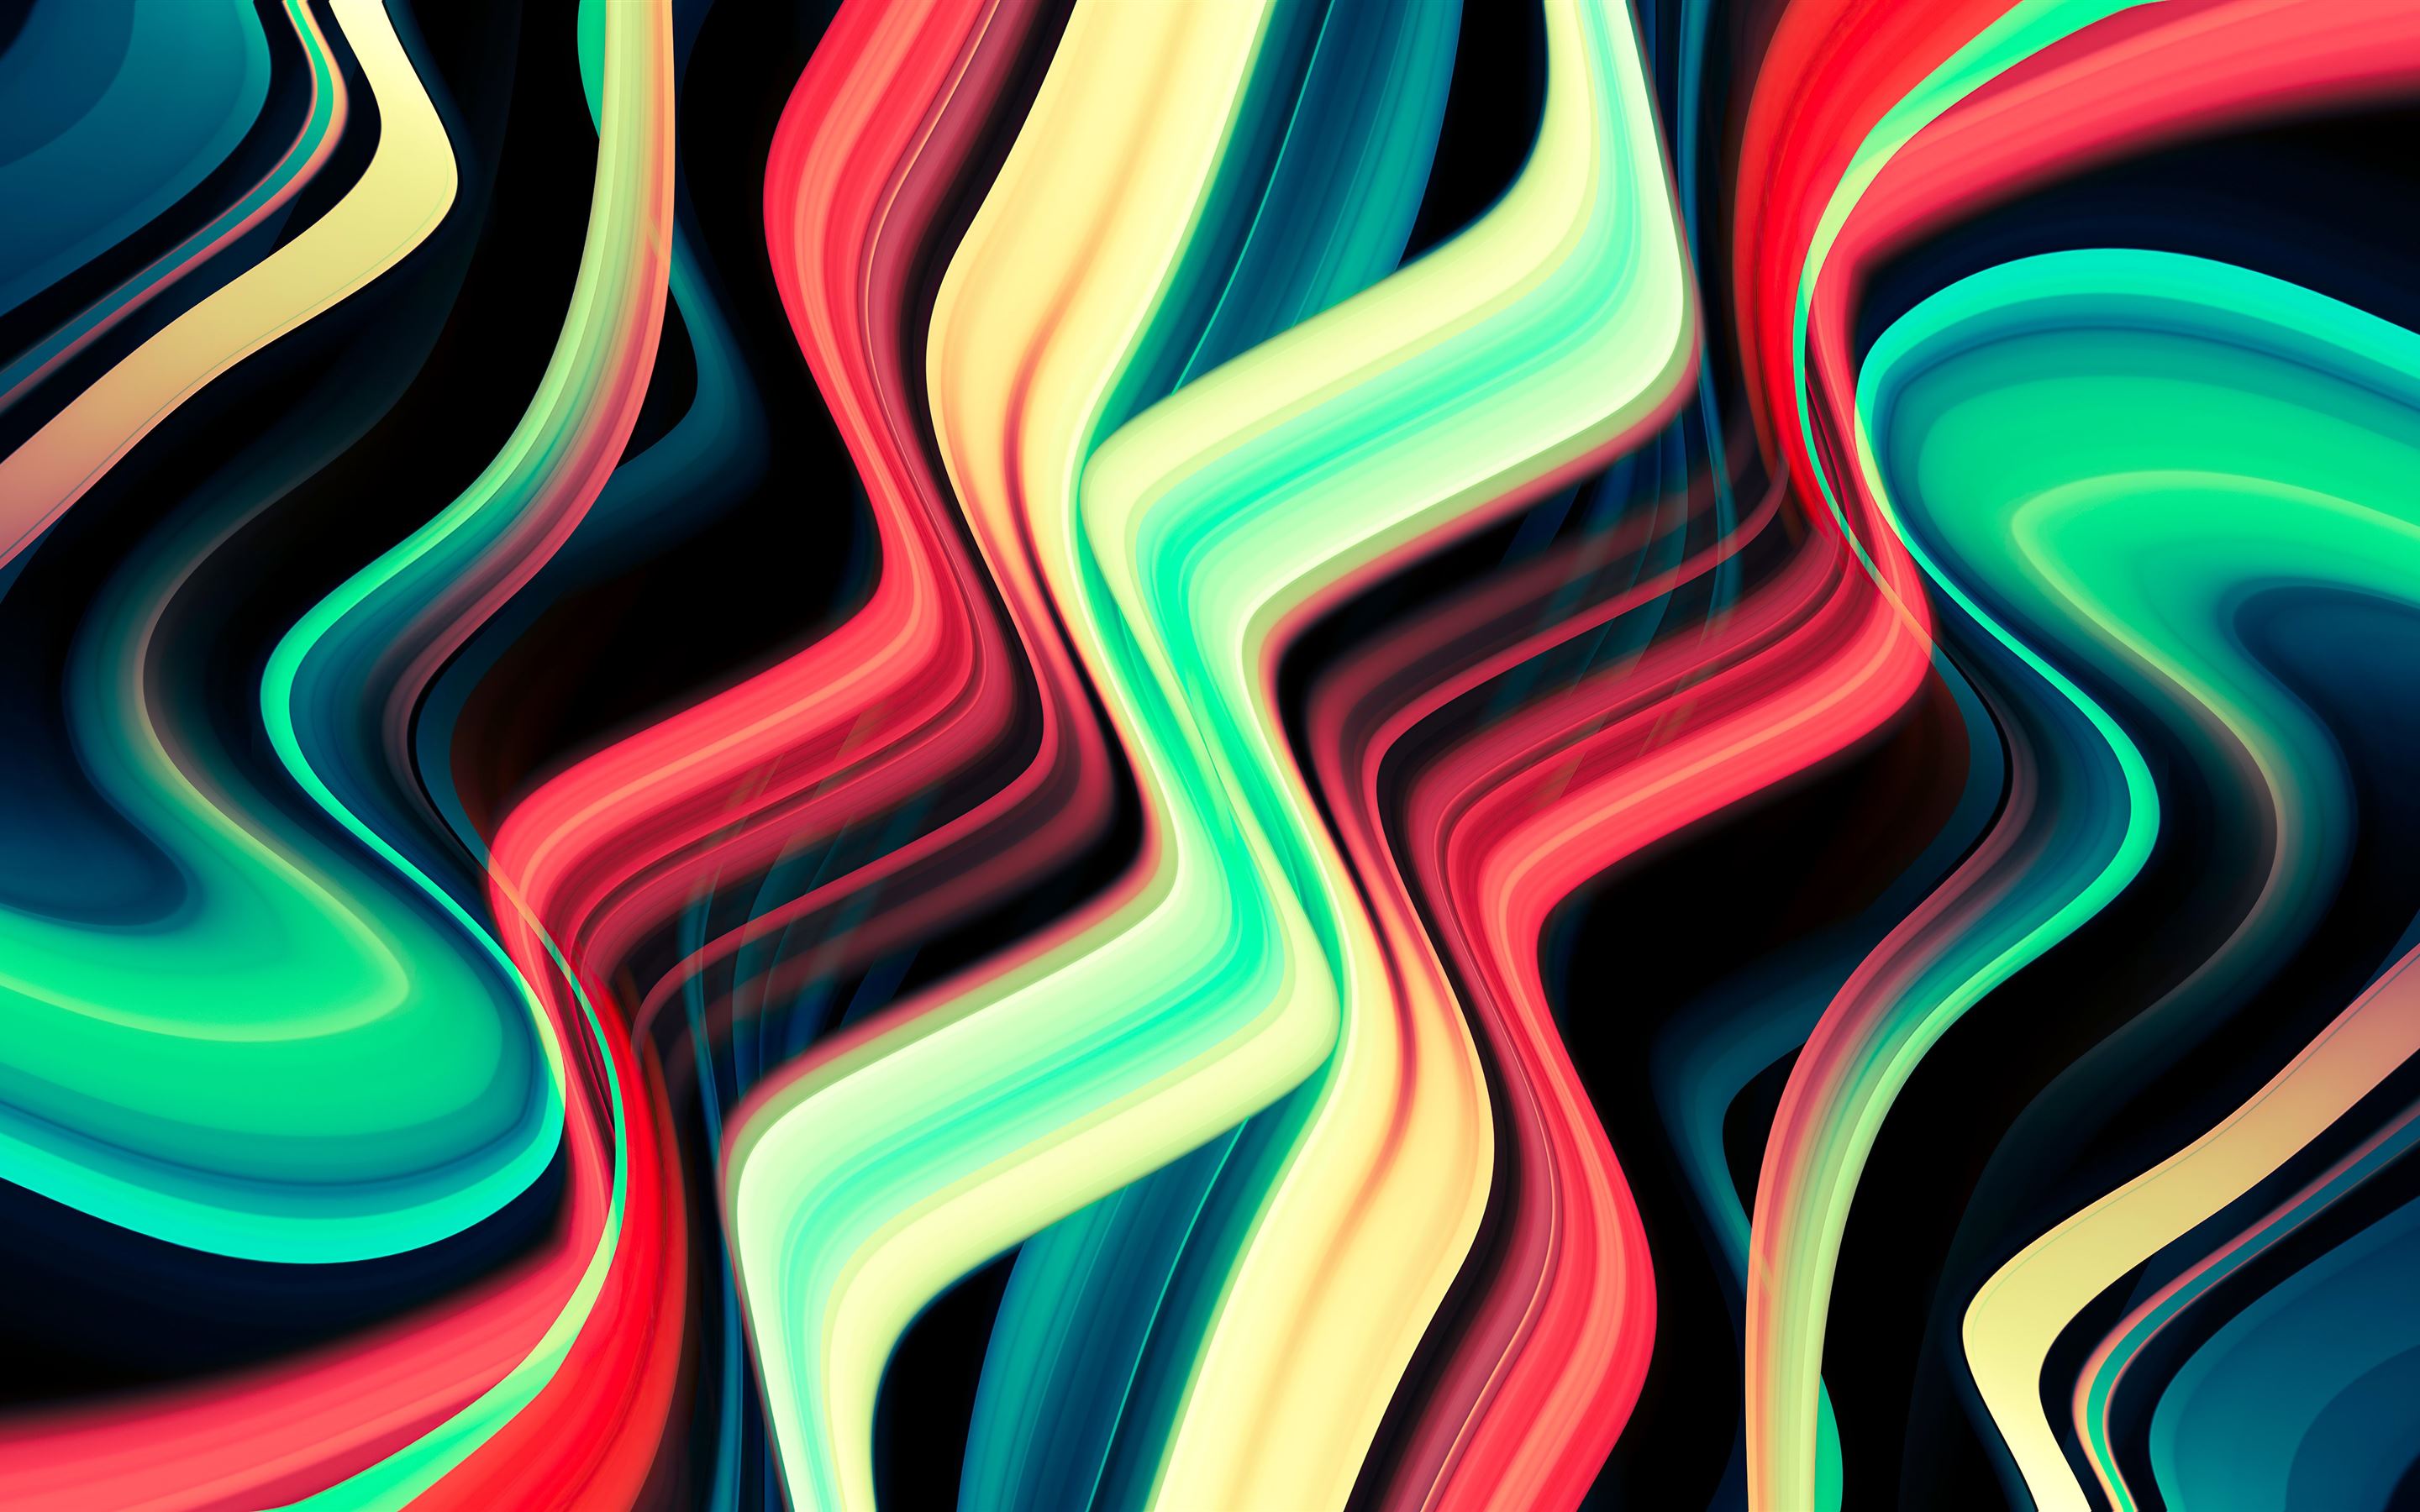 Get the 8 Colorful Abstract New iPad Pro Wallpapers  OSXDaily